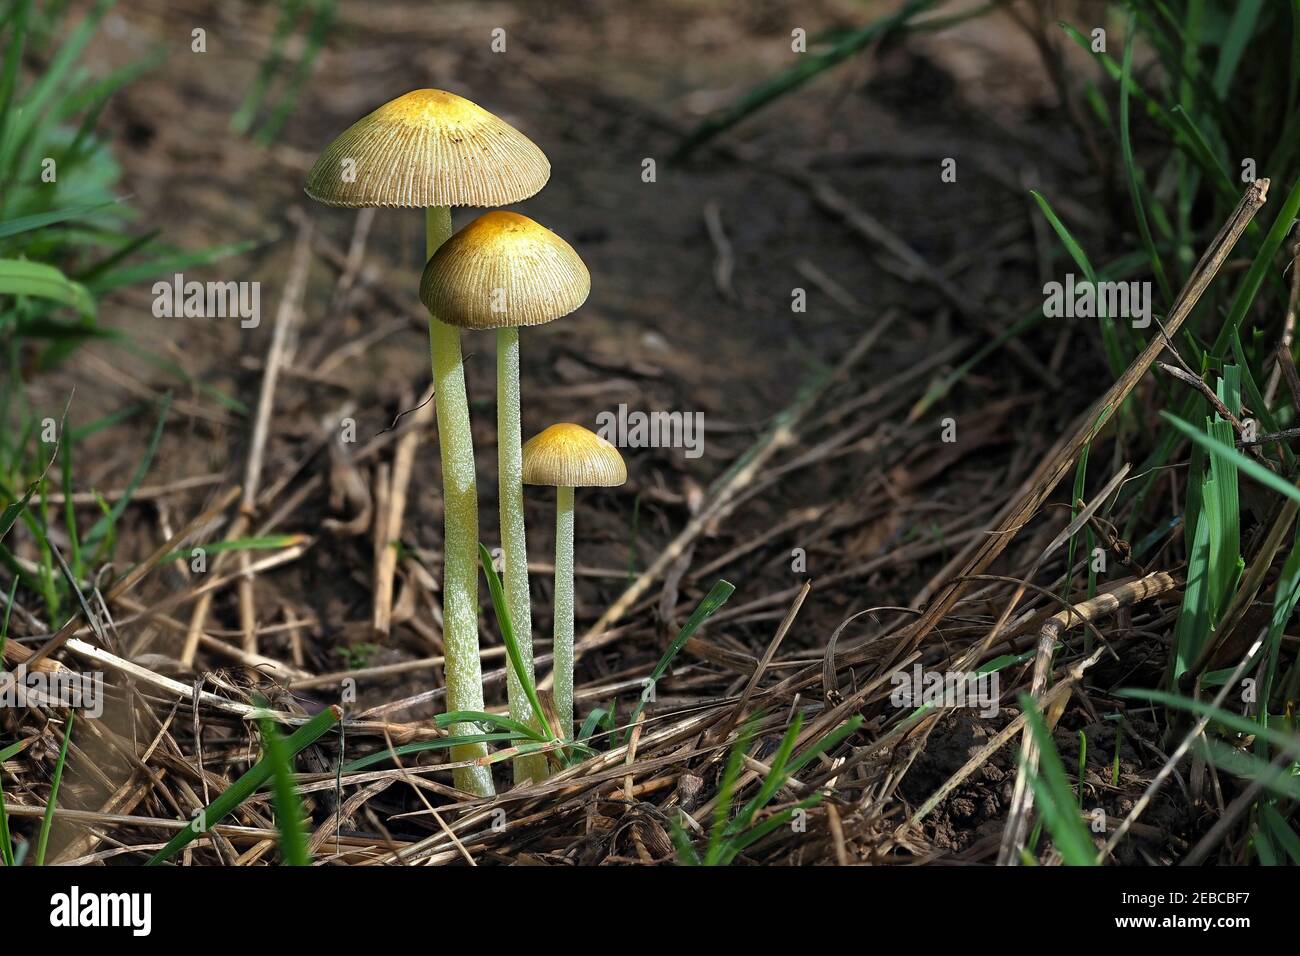 Bolbitius titubans, is a widespread species of inedible mushroom found in America and Europe. , an intresting photo Stock Photo